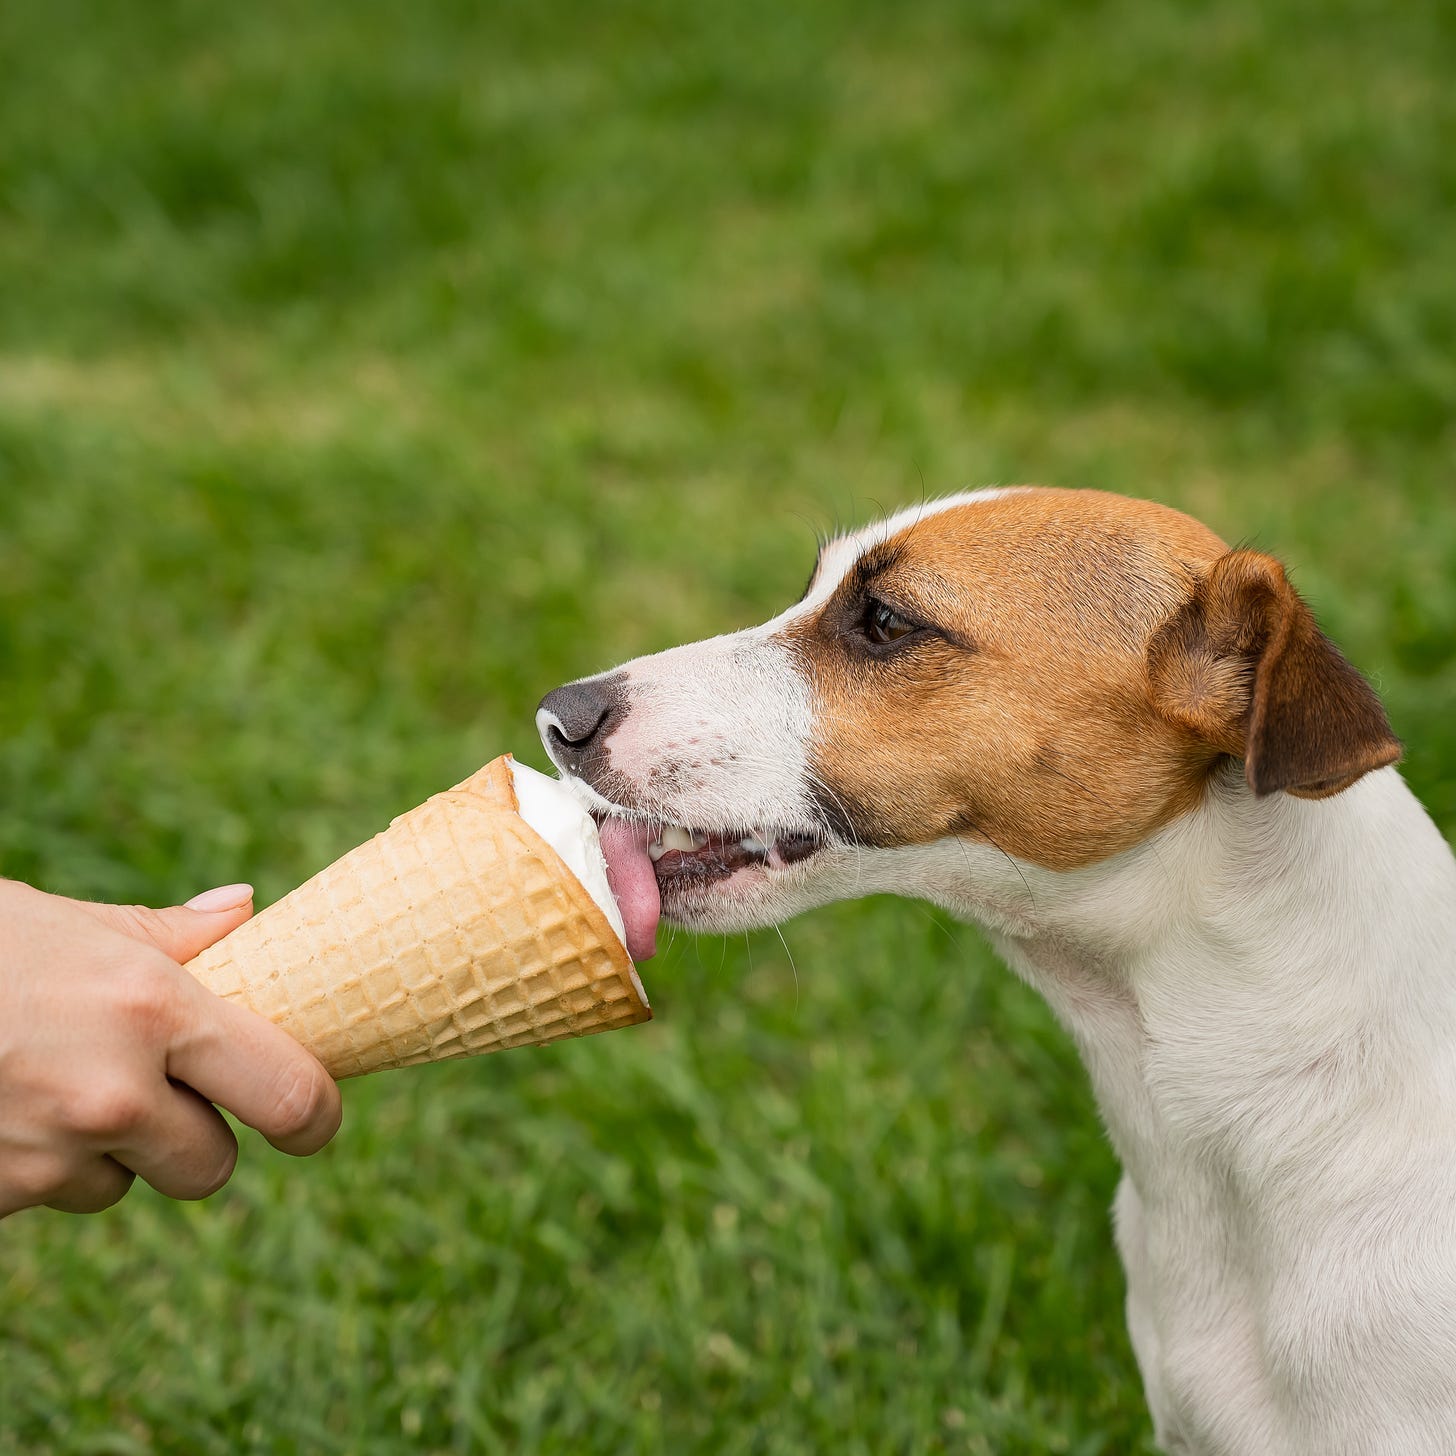 A dog licking an ice cream cone

Description automatically generated